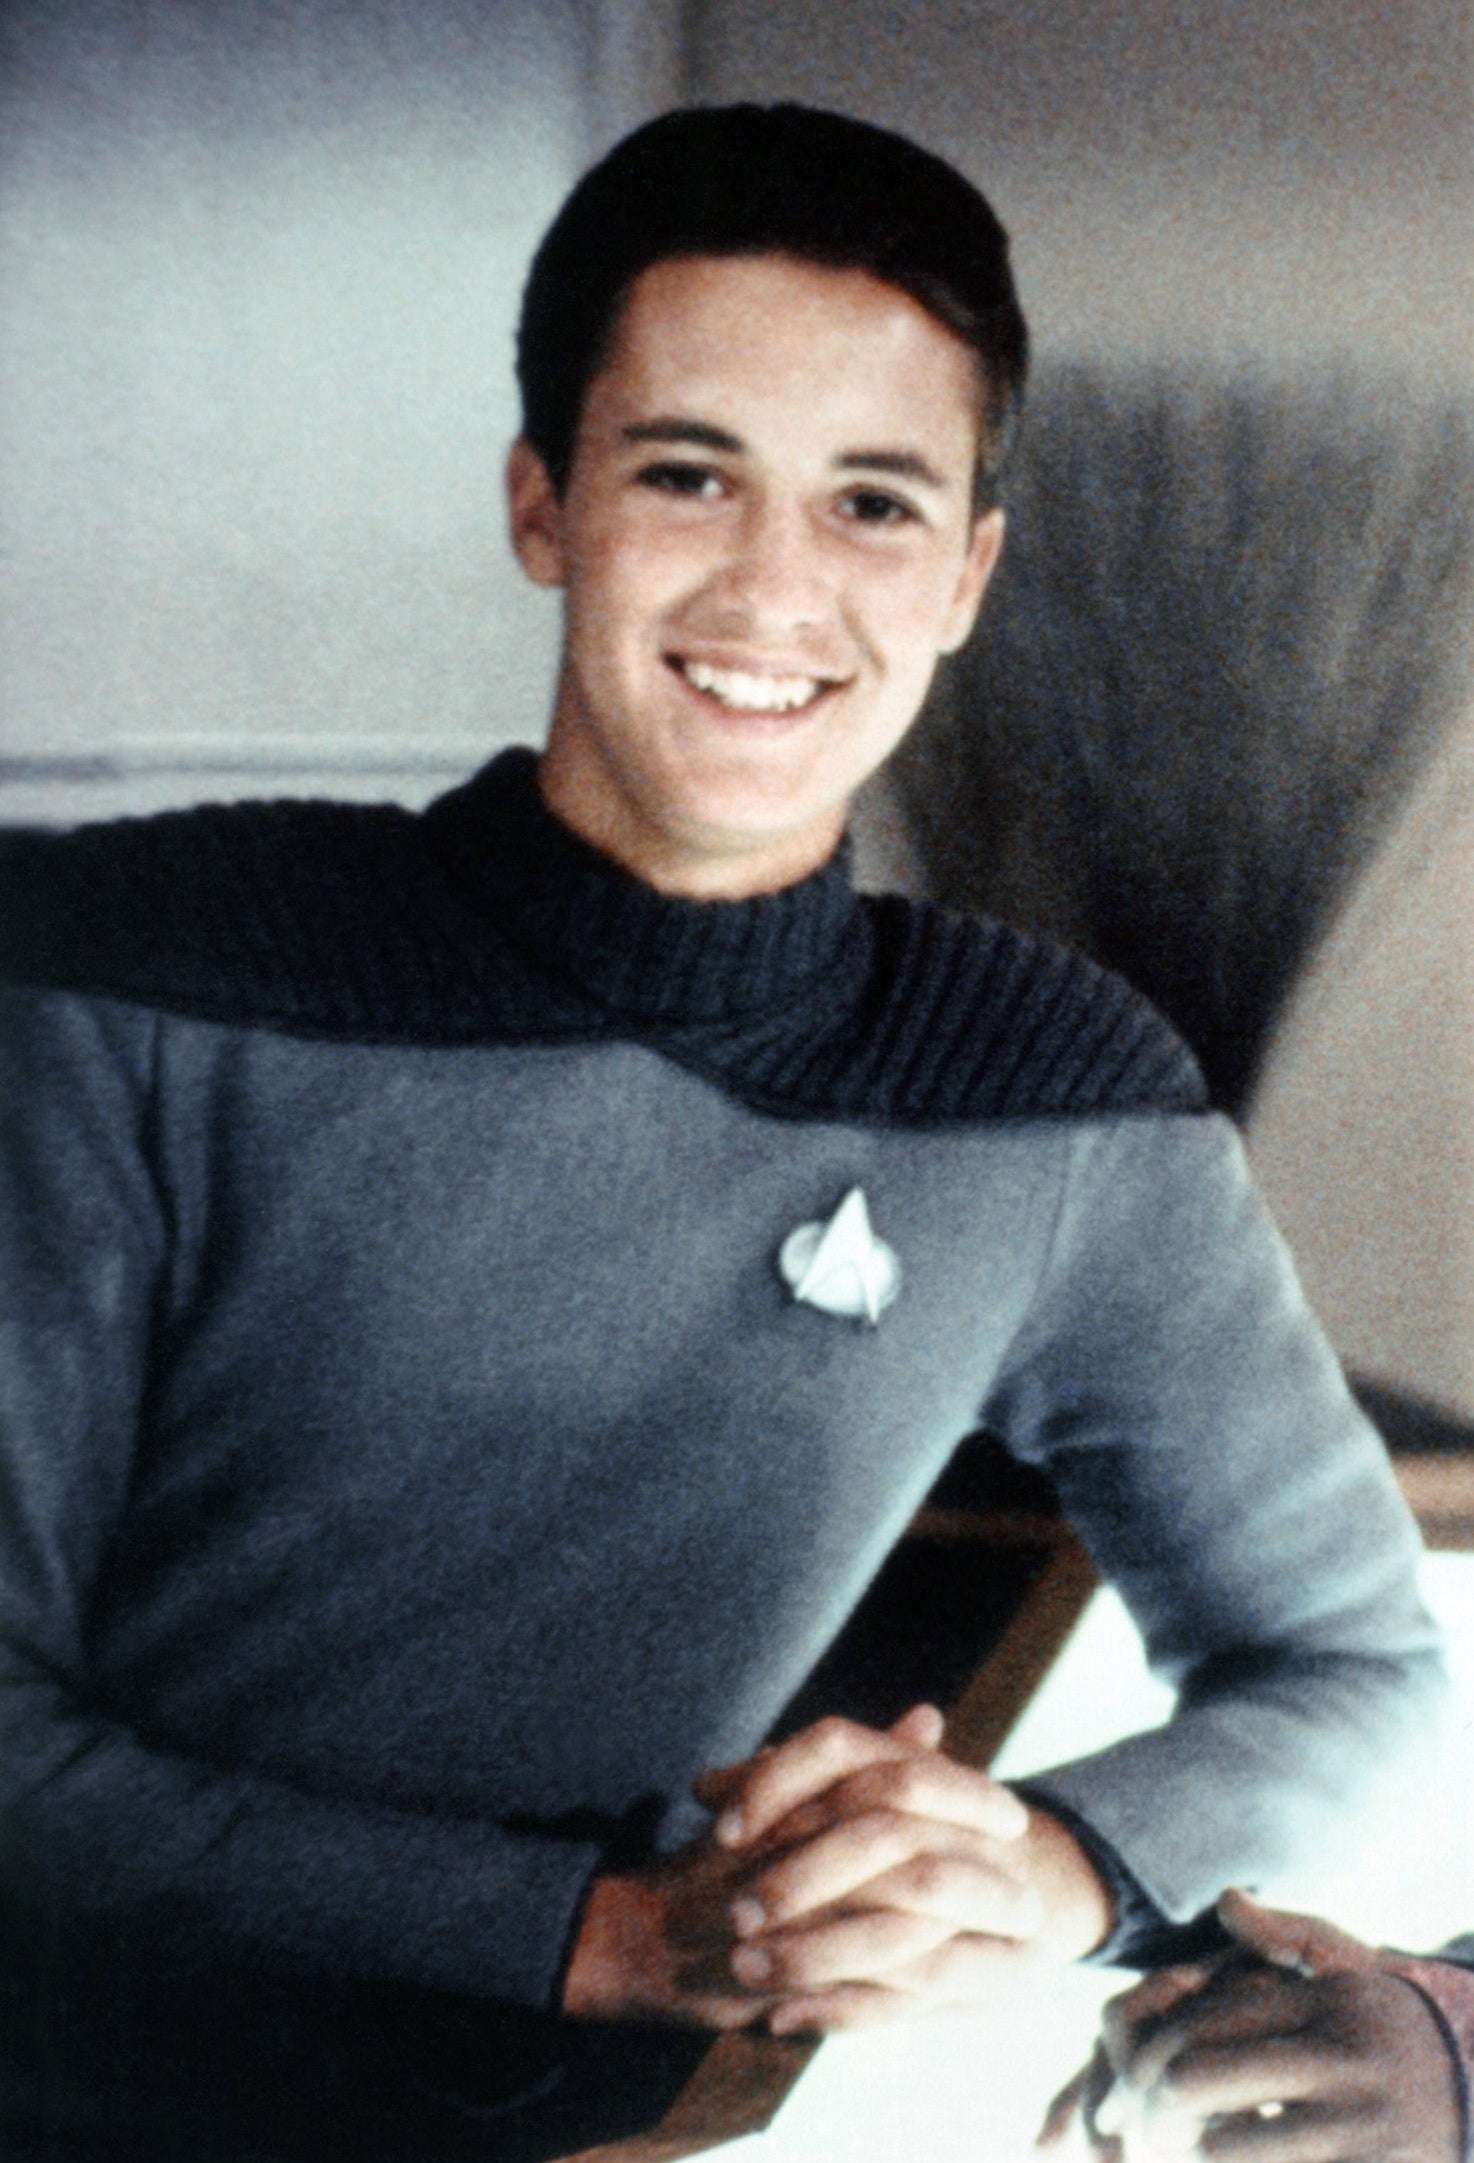 Wesley Crusher from Star Trek sitting at a table, smiling, in character attire